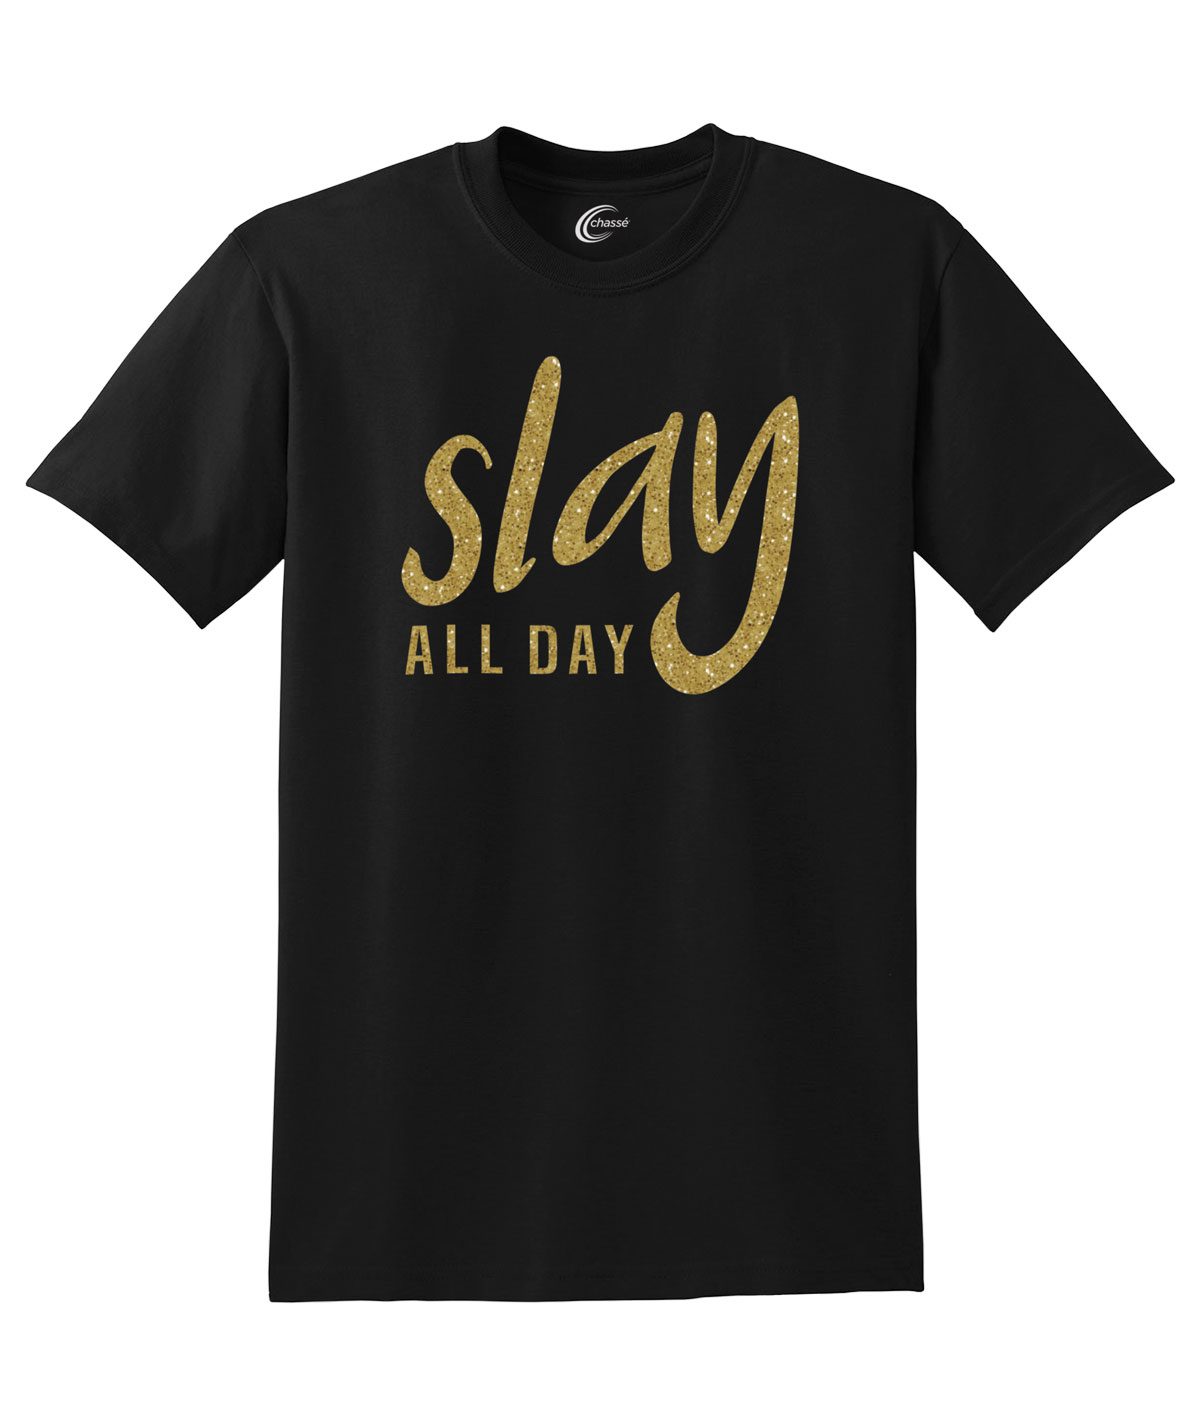 Chasse Slay All Day Tee